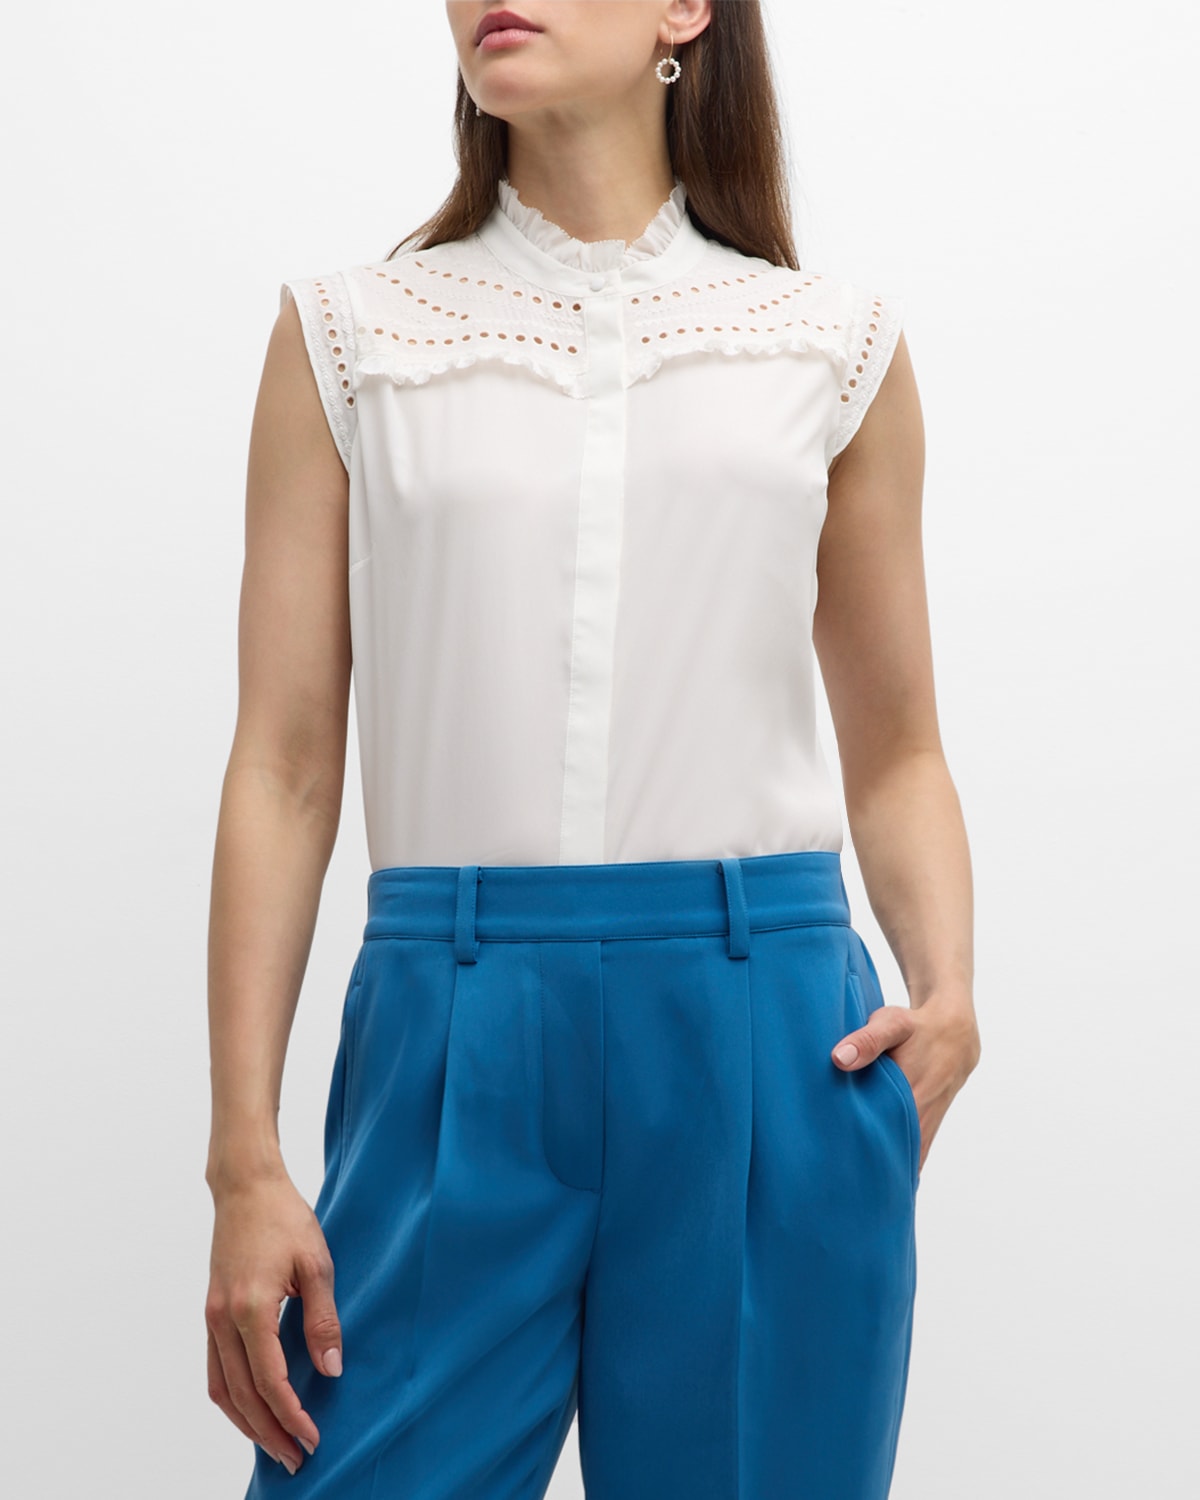 The Terrin Eyelet-Embroidered Ruffle Blouse